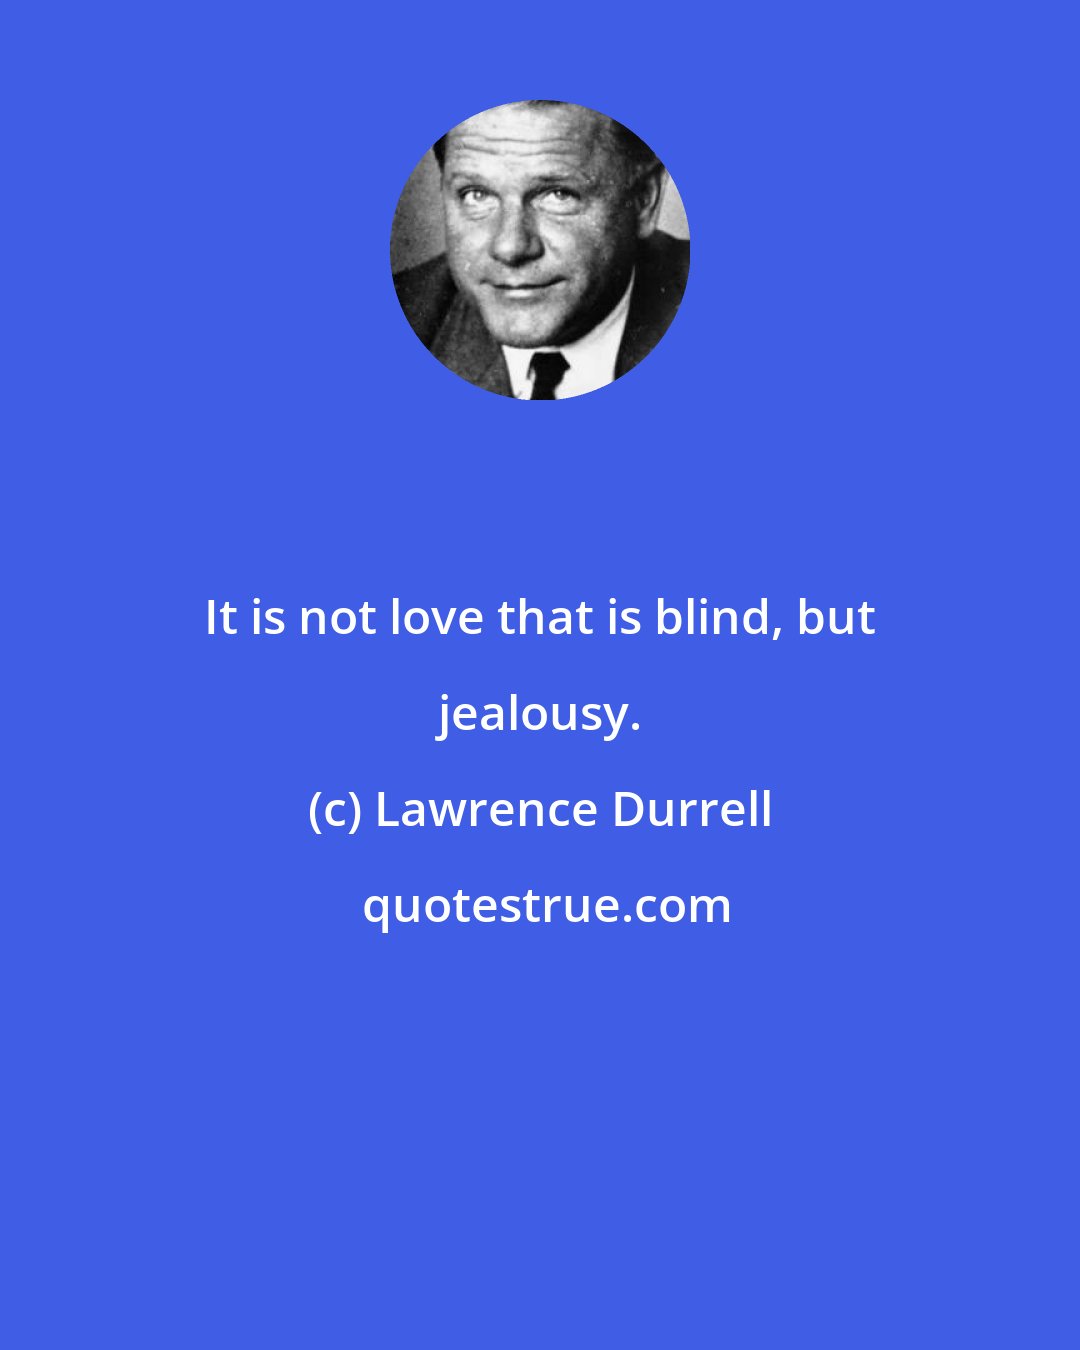 Lawrence Durrell: It is not love that is blind, but jealousy.